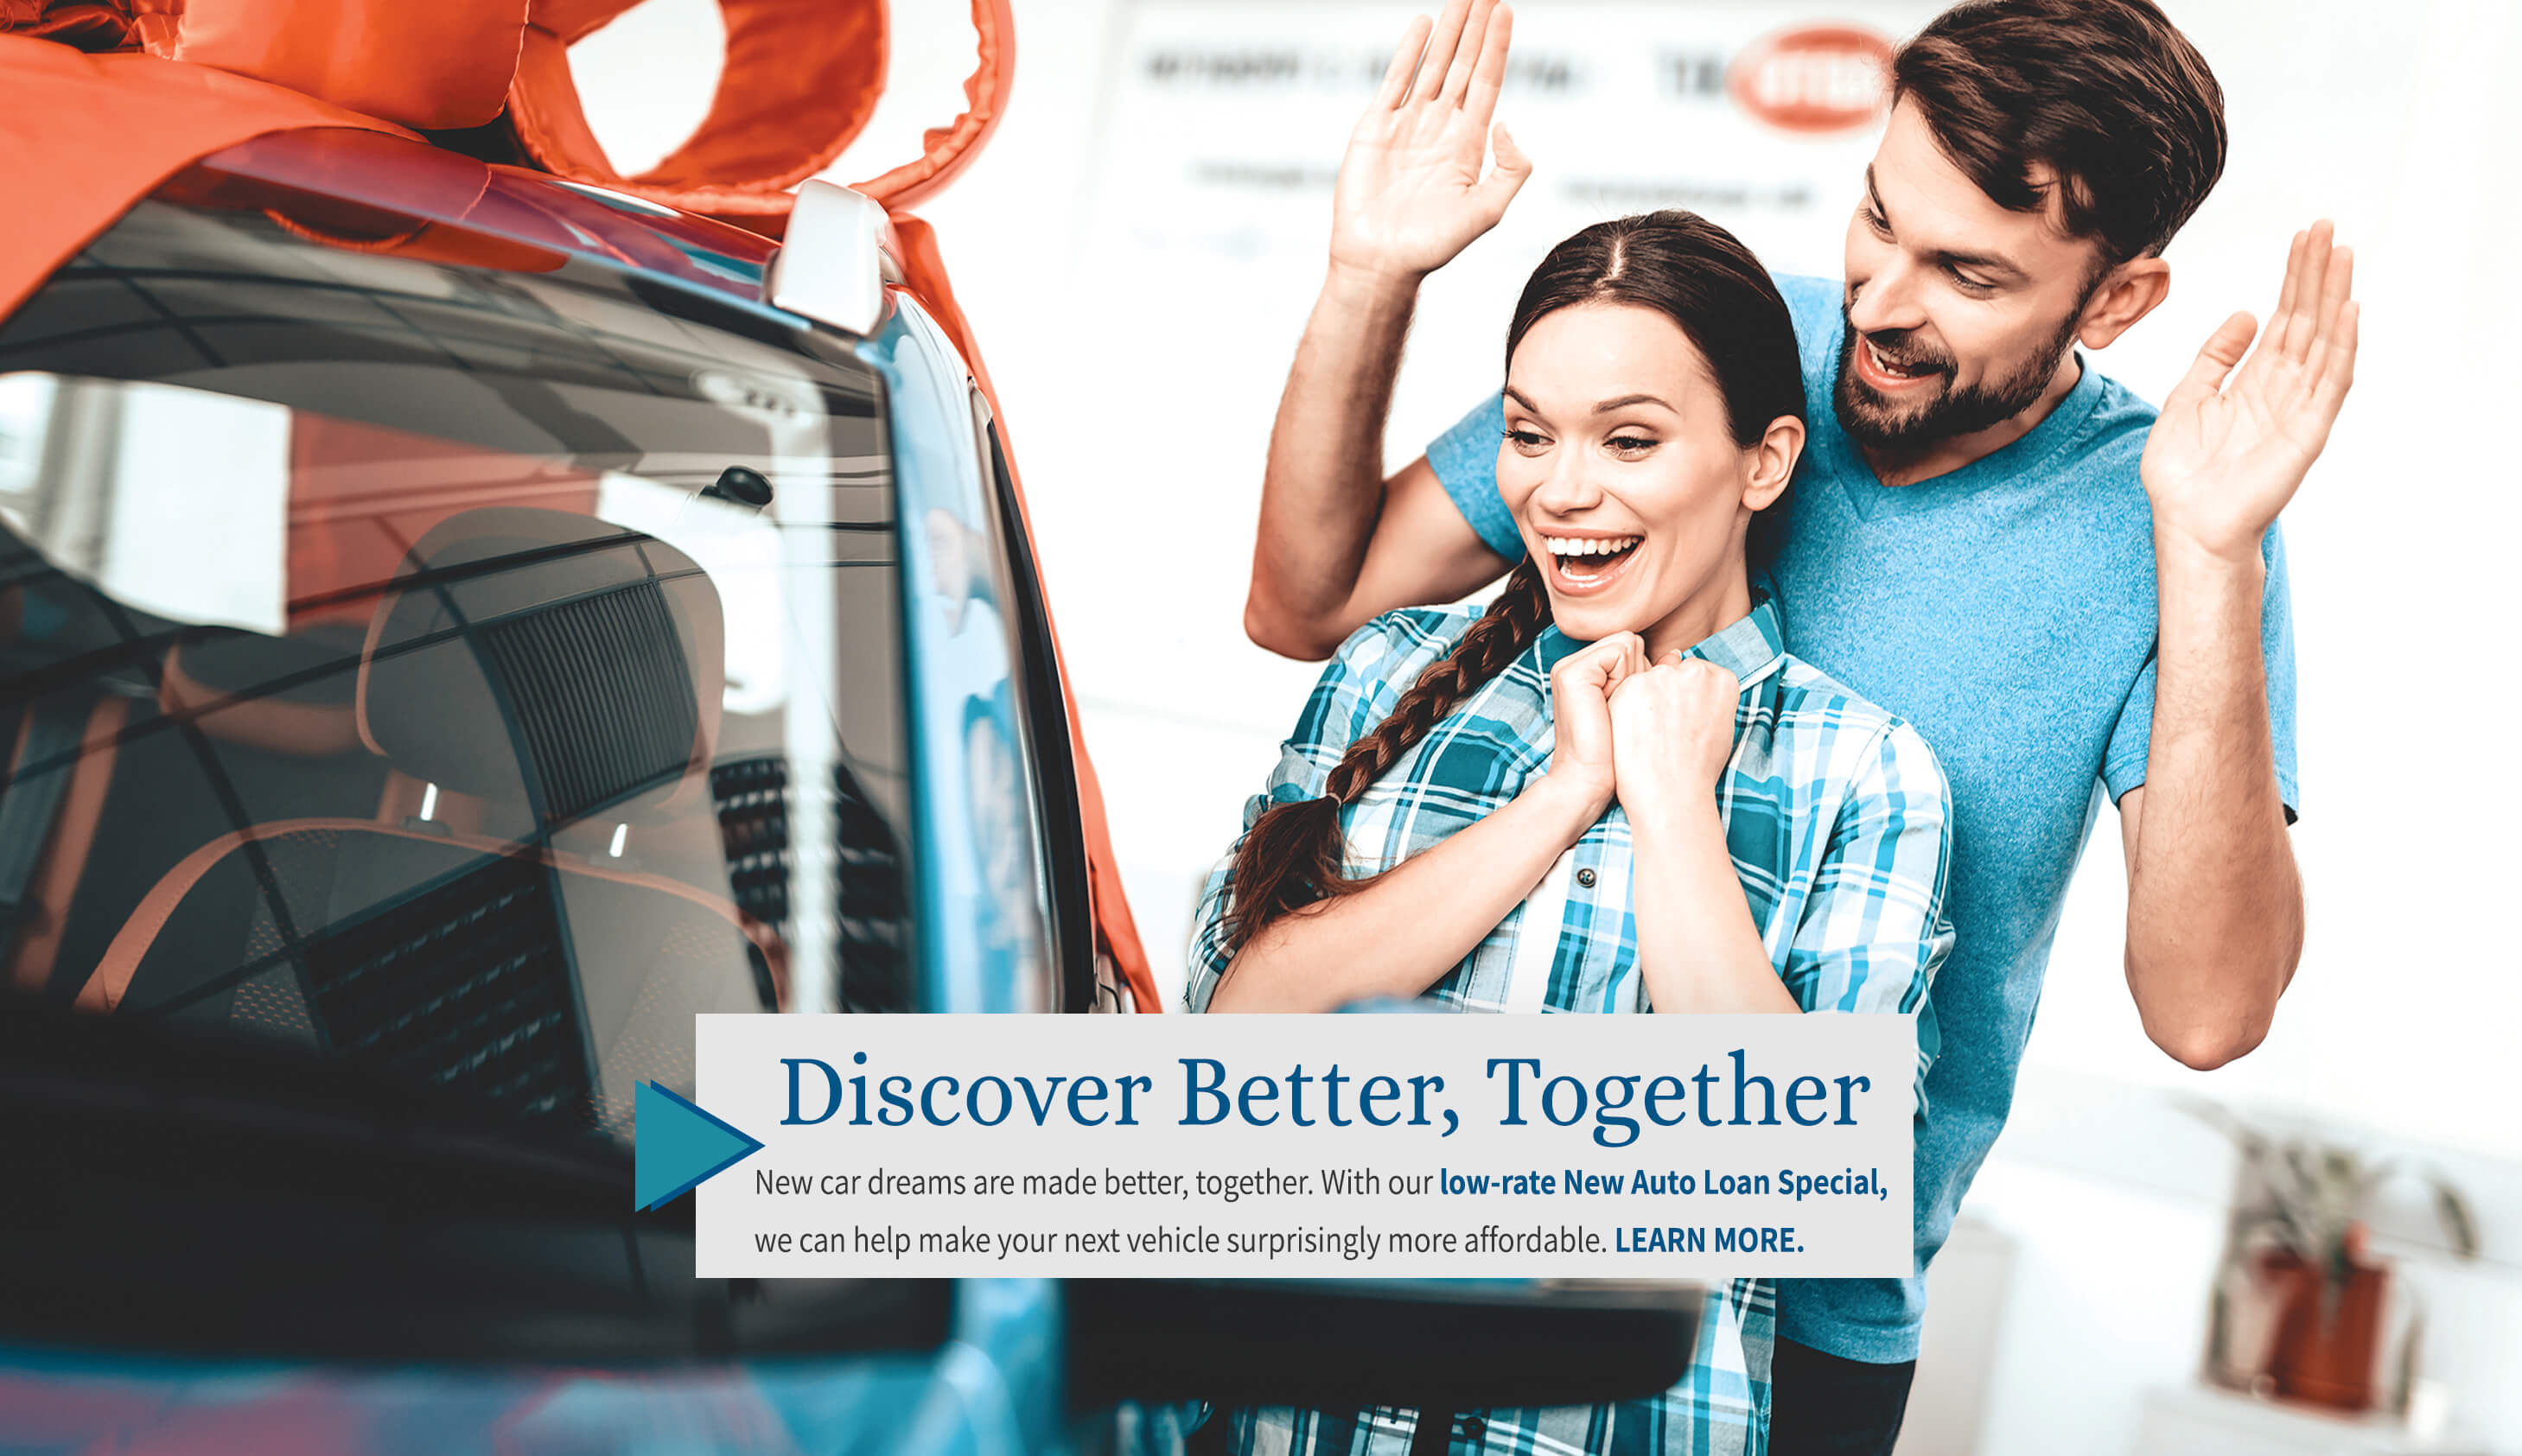 discover better, together New car dreams are made better, together. with our low-rate new auto loan special, we can help make your next vehicle surprisingly more affodable. learn more.